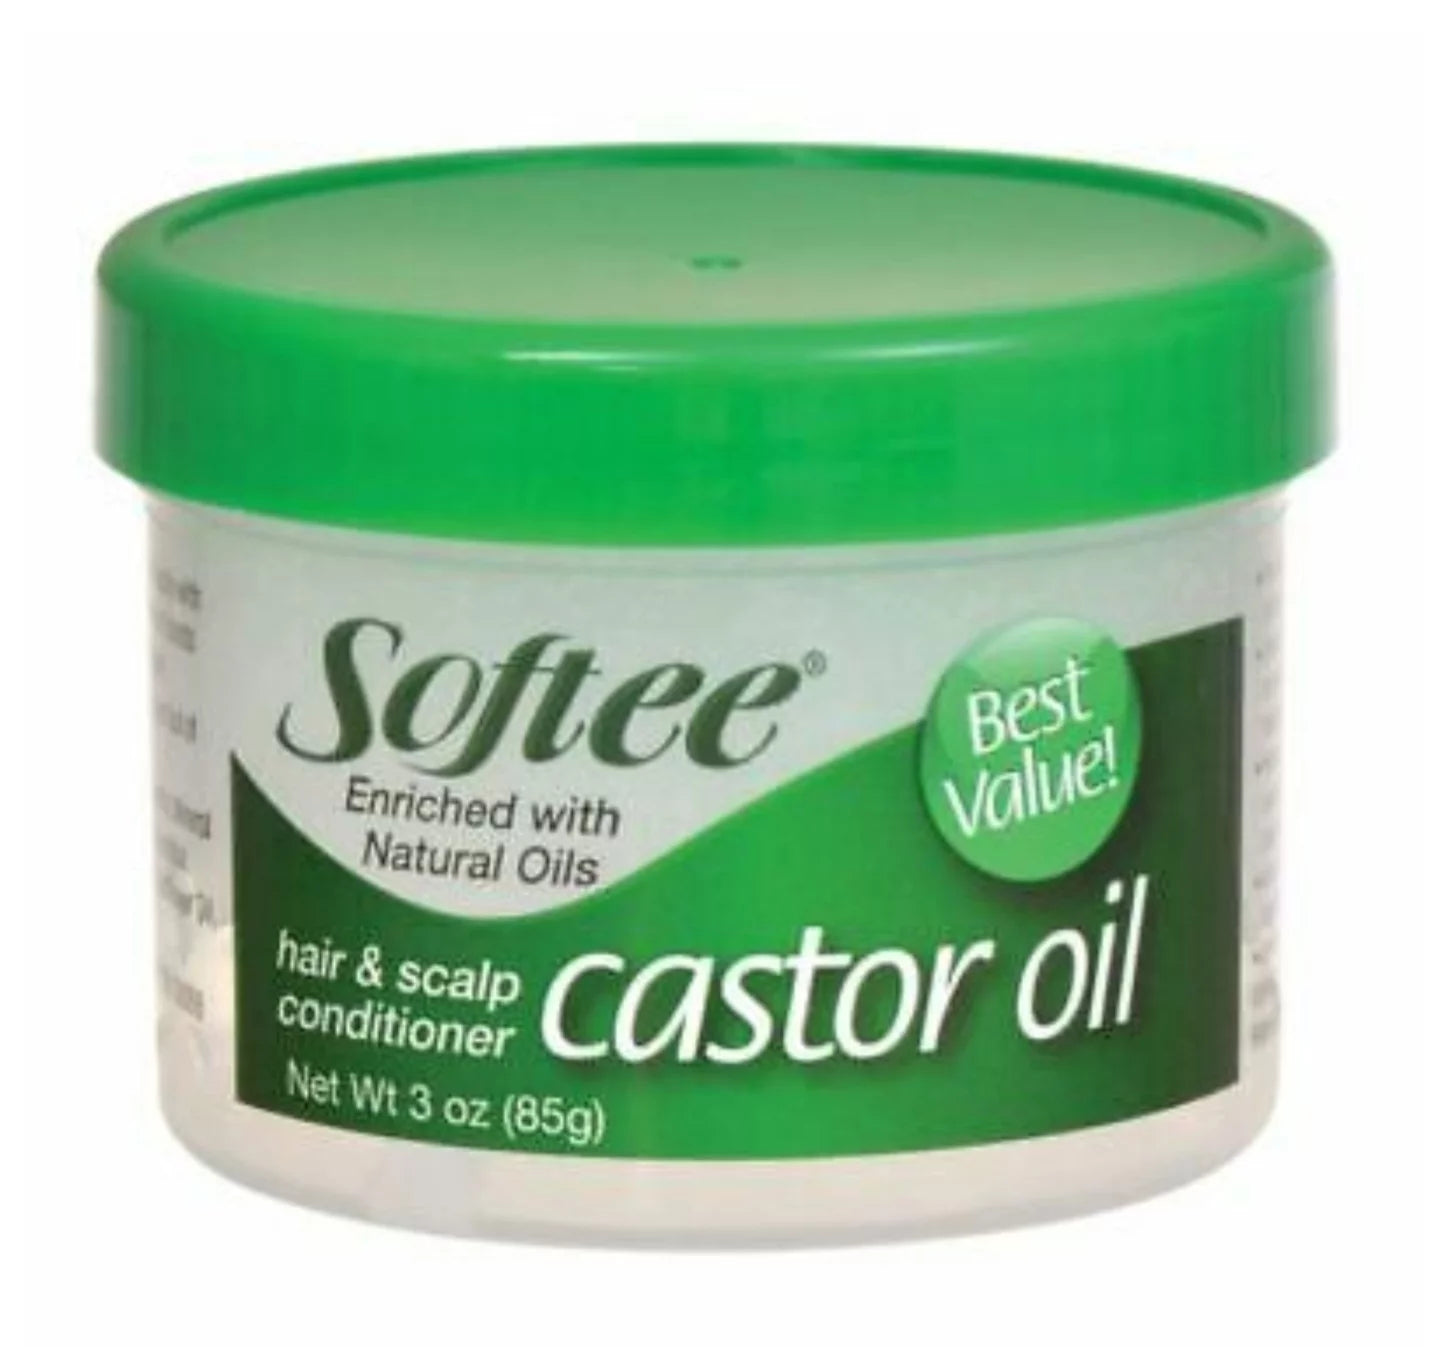 Castor Oil Hair and Scalp Conditioner